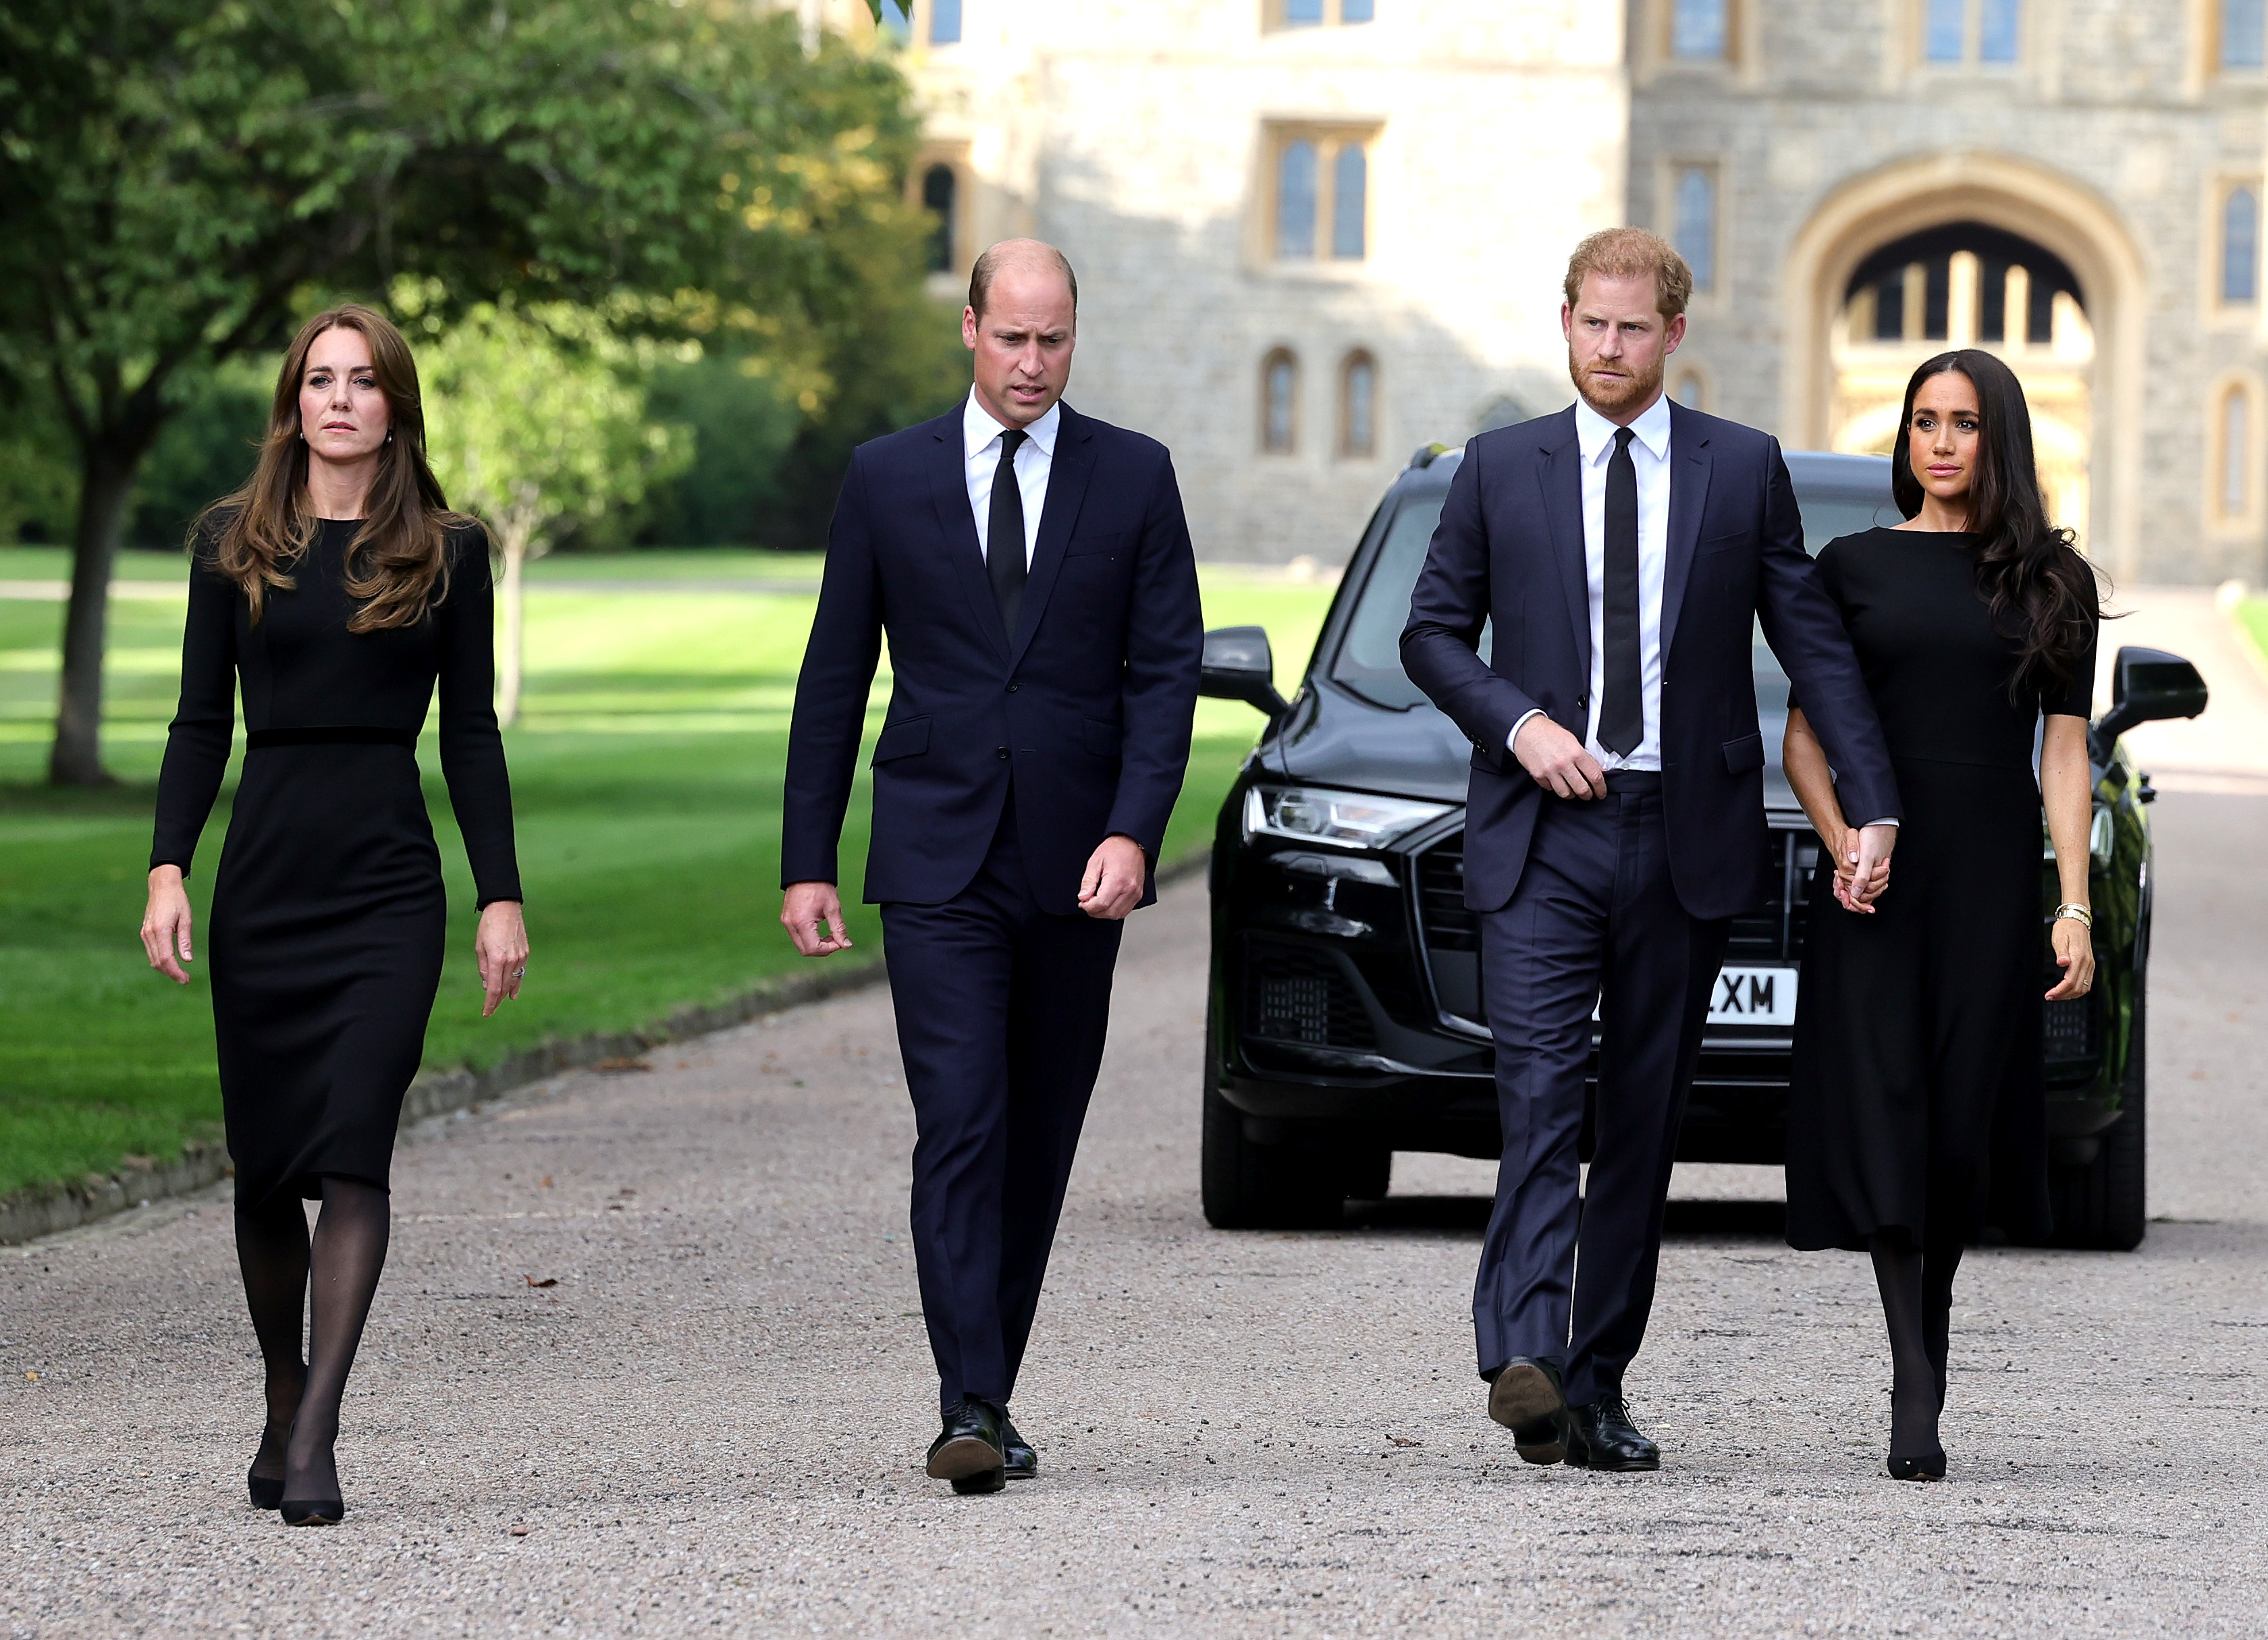 Princess Catherine, Prince William, Prince Harry, and Meghan Markle on their way to view flowers and tributes to the late Queen Elizabeth II in Windsor, England on September 10, 2022 | Source: Getty Images